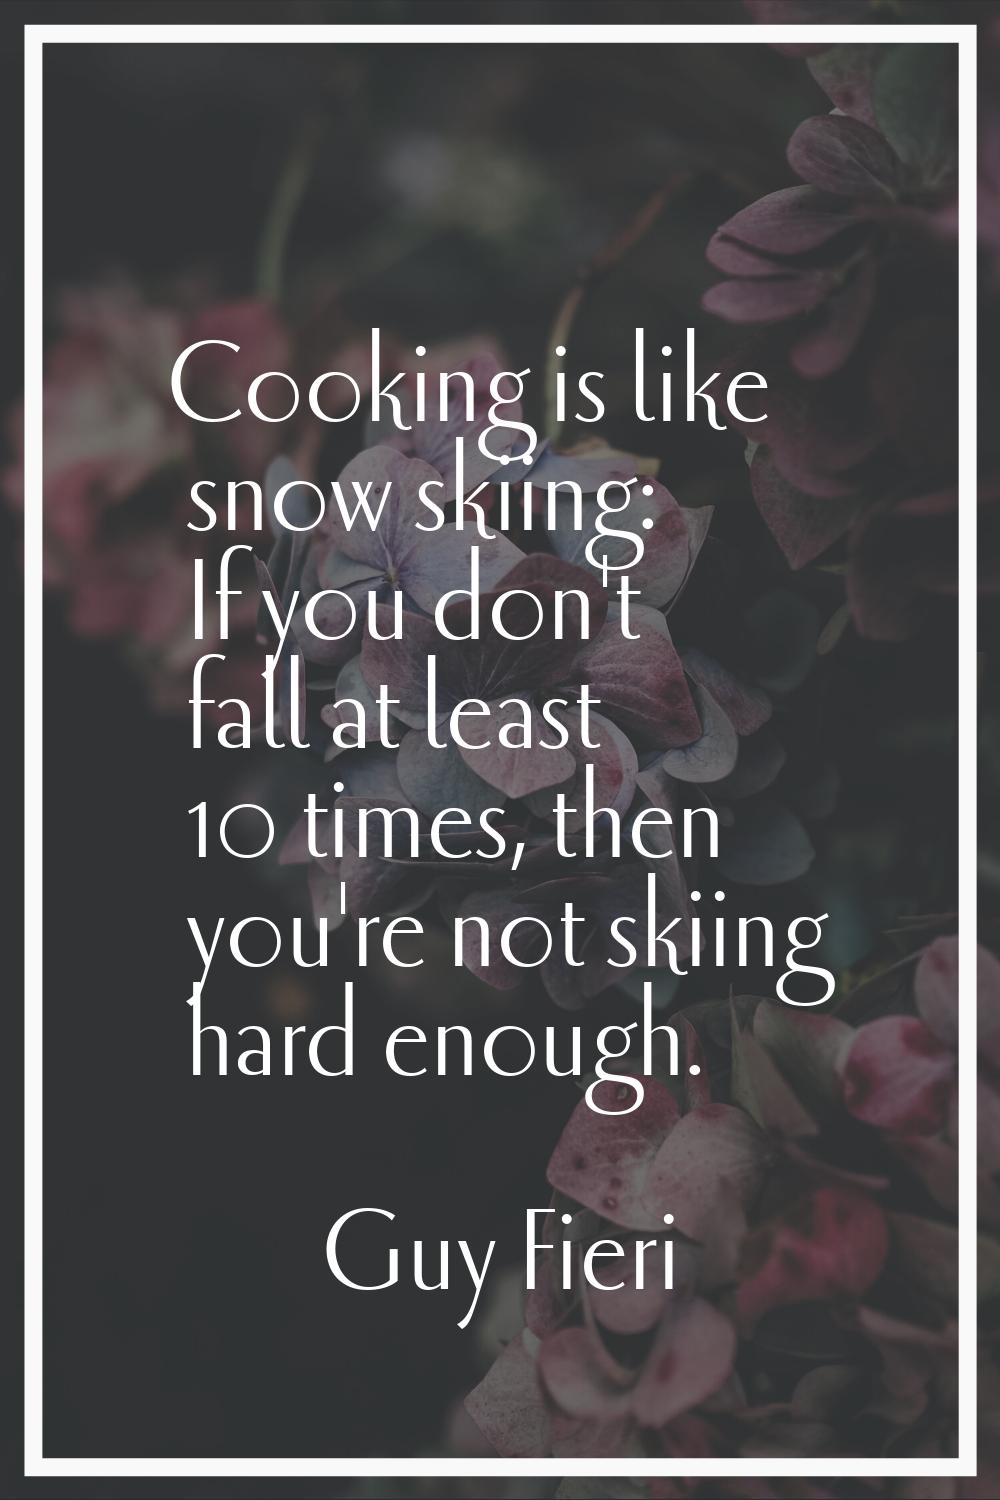 Cooking is like snow skiing: If you don't fall at least 10 times, then you're not skiing hard enoug